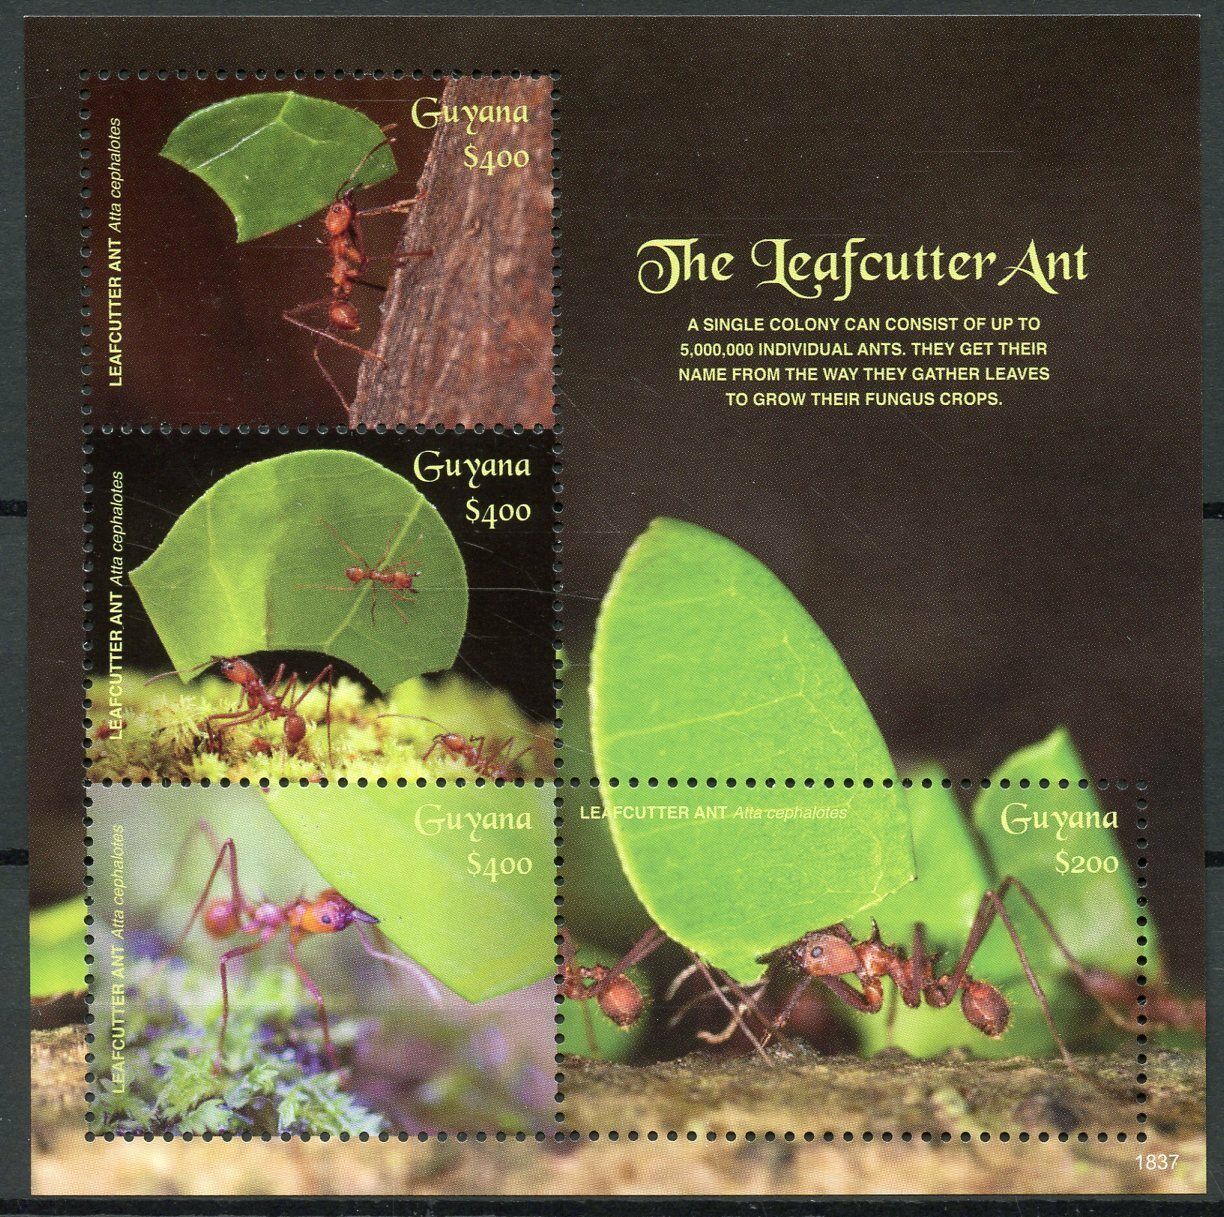 Guyana 2018 MNH Insects Stamps Leafcutter Ant Ants Fauna Nature 4v M/S